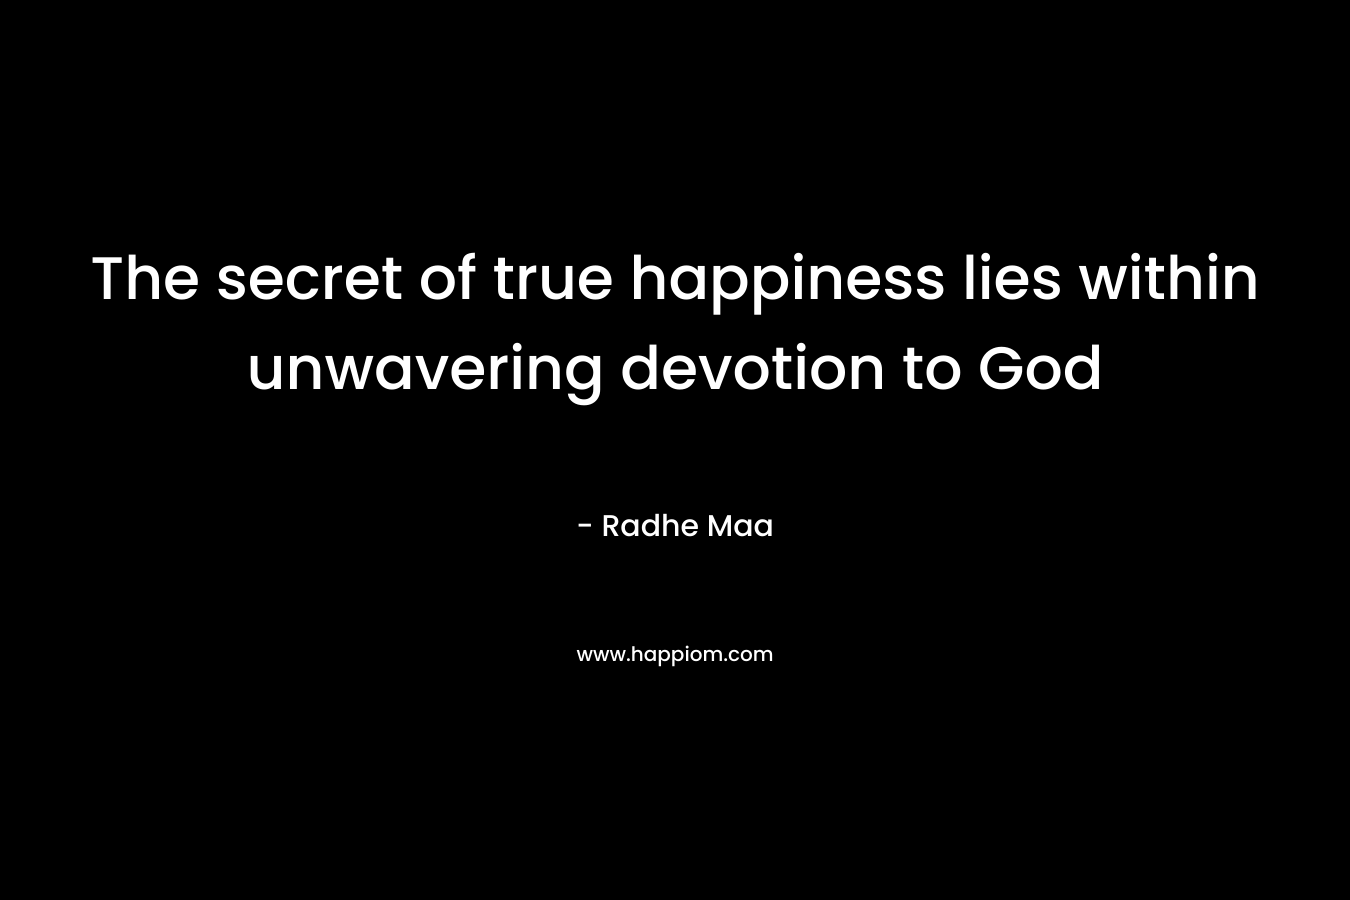 The secret of true happiness lies within unwavering devotion to God